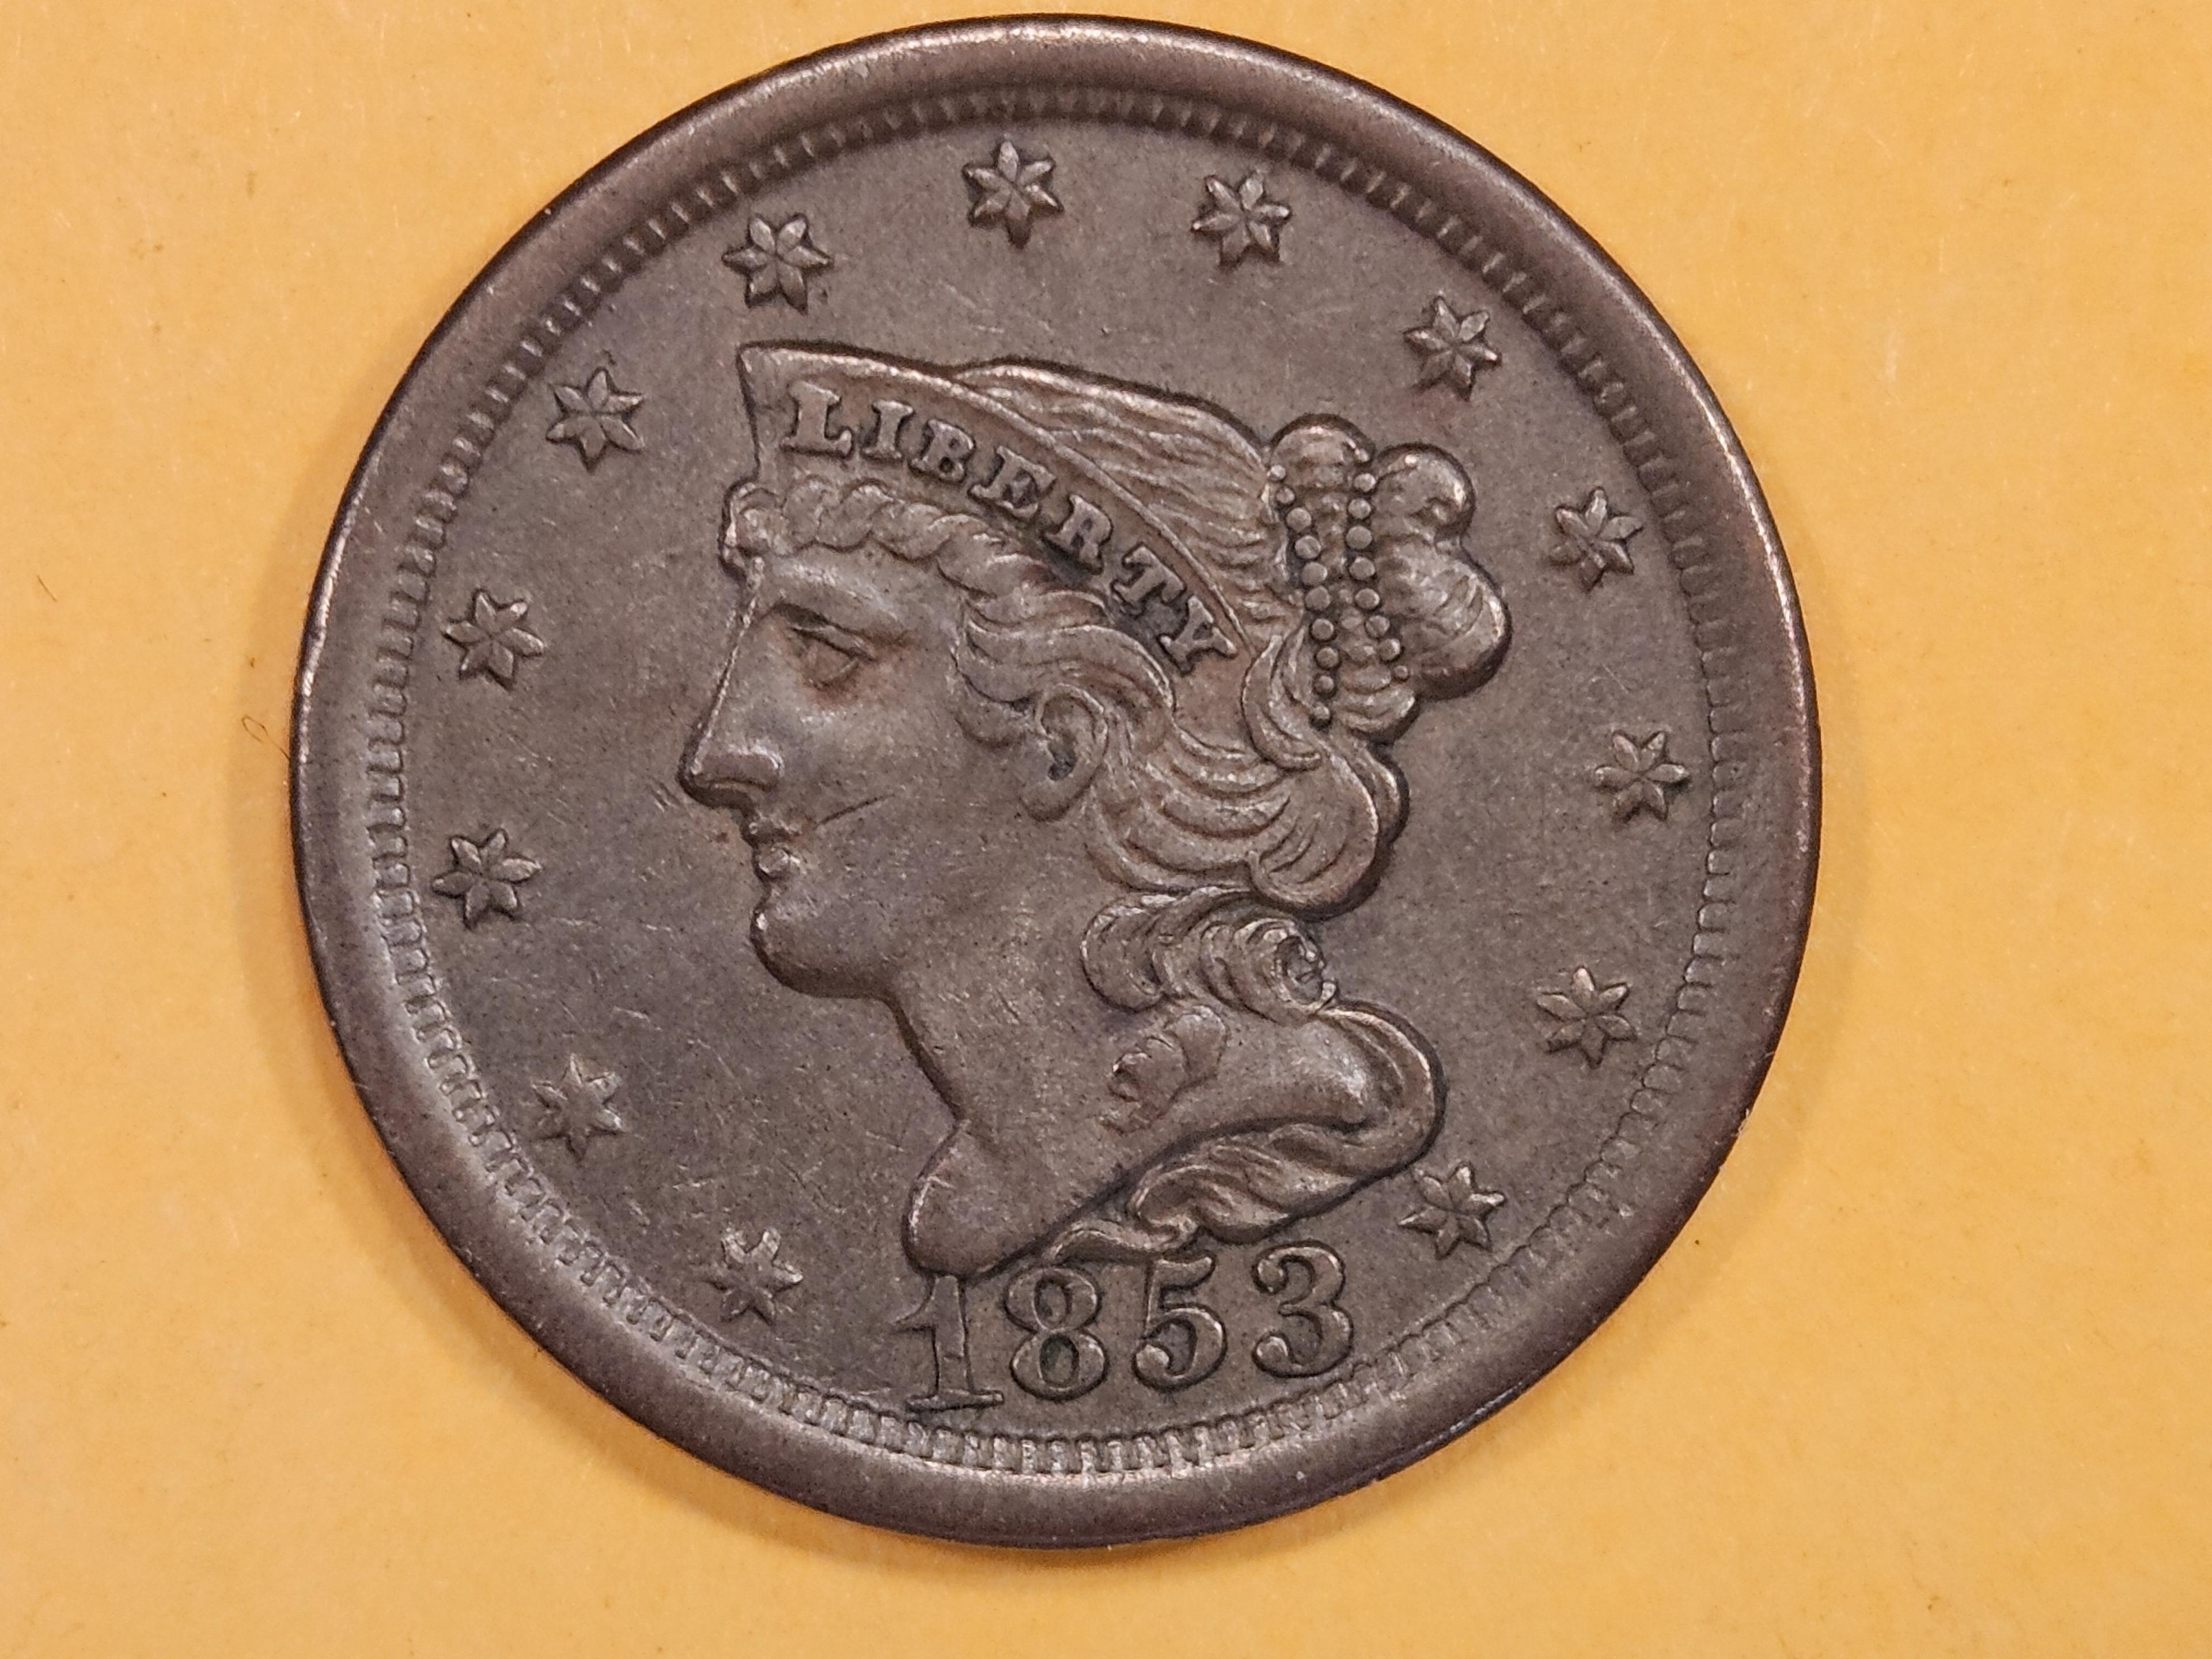 1853 Braided Hair Half-Cent in Choice About Uncirculated plus